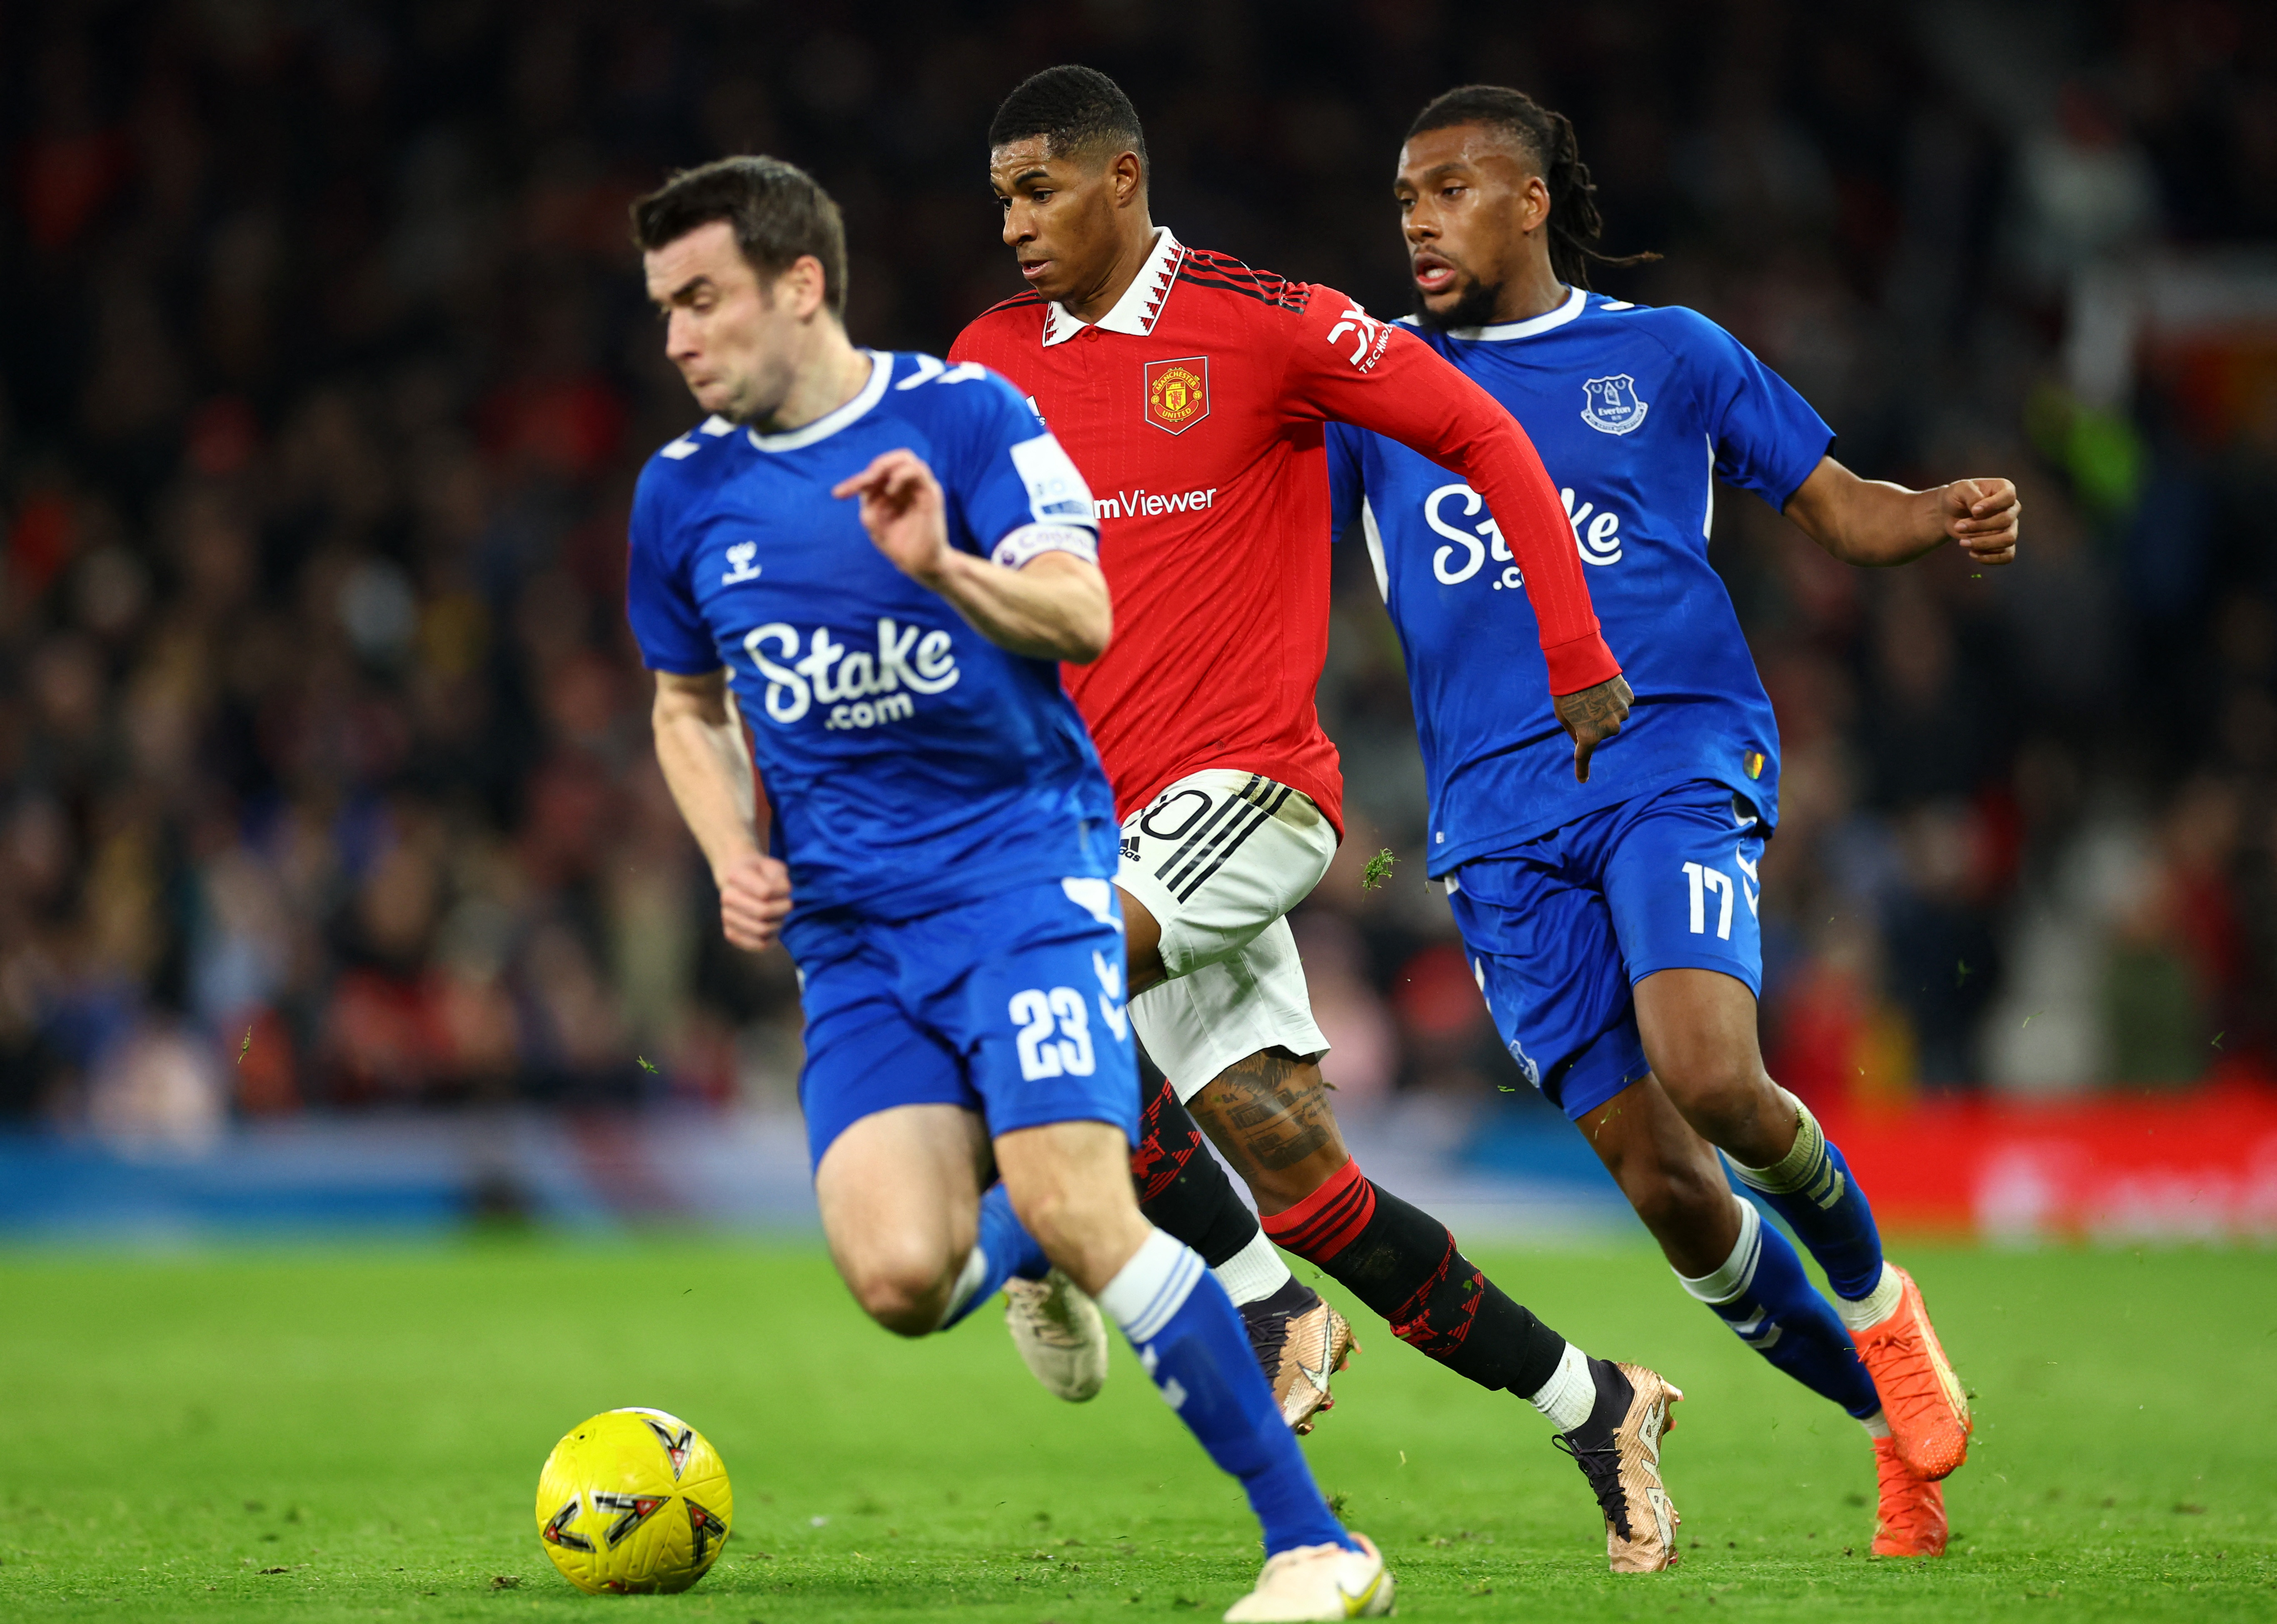 Manchester United vs Everton Preview